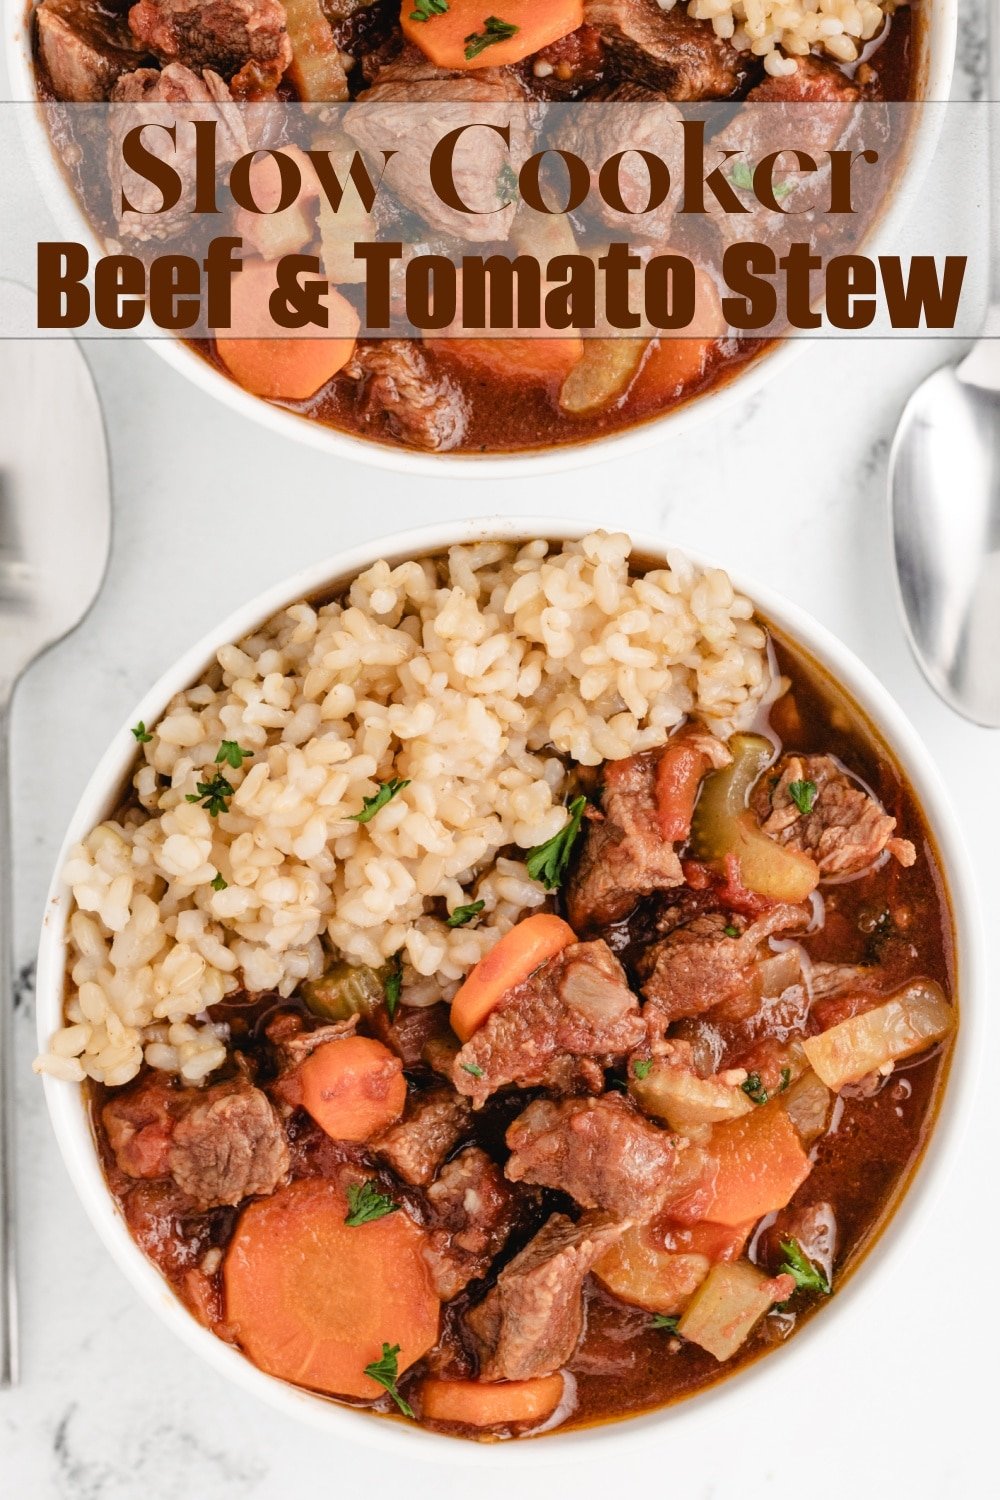 You're going to love the rich and robust flavors of this Slow Cooker Beef and Tomato Stew, a timeless classic that has been slow-simmered to what tastes like perfection! This tomato-rich stew is true comfort food and the ideal dish to savor on a snug evening. It's the perfect slow cooker dinner for the fall season. via @cmpollak1